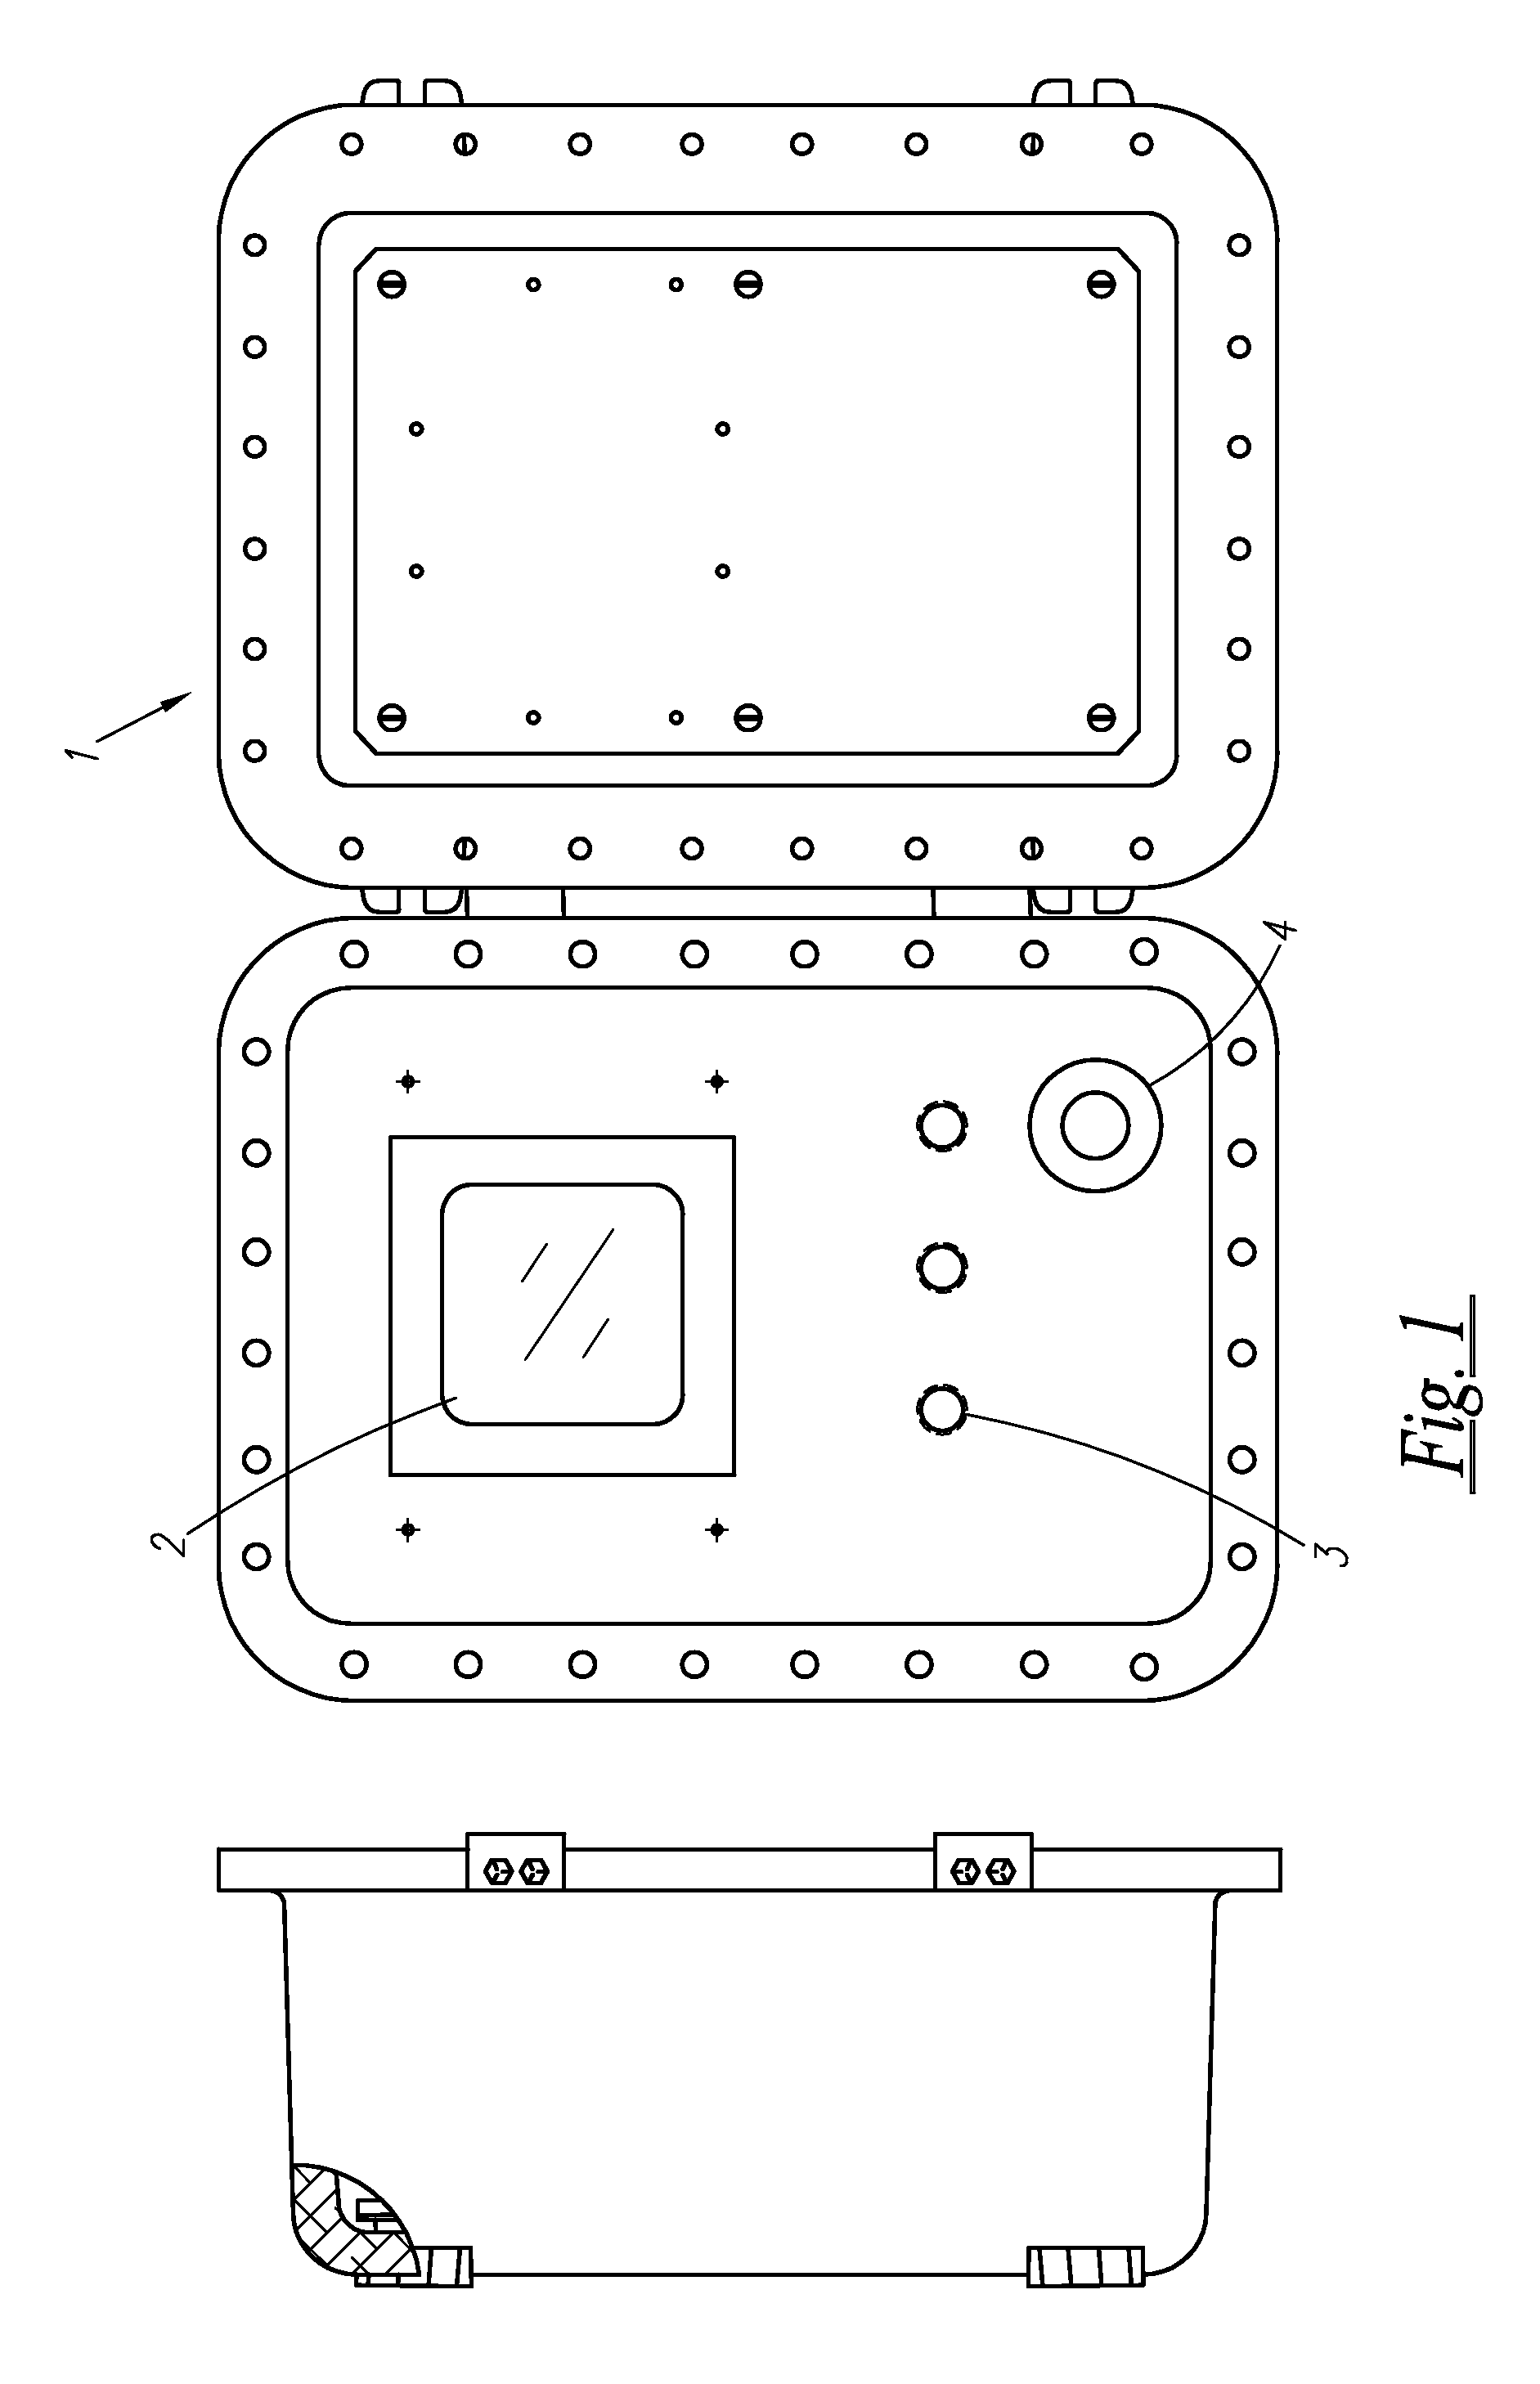 Actuator controller for monitoring health and status of the actuator and/or other equipment